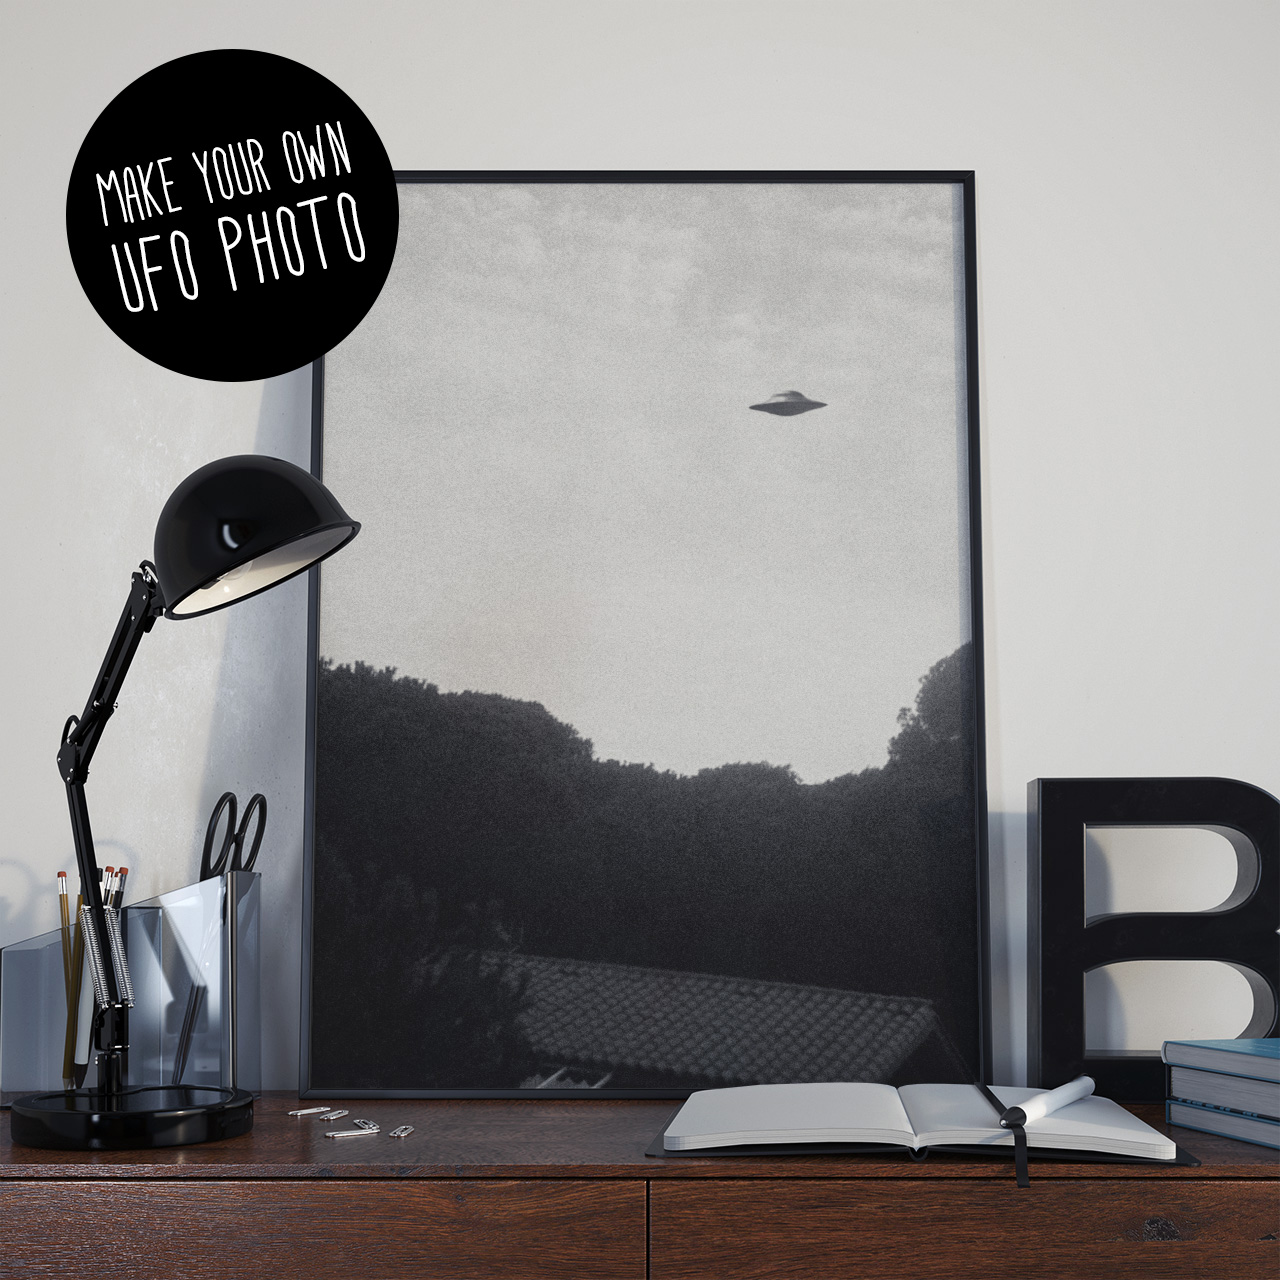 Make your own UFO photo